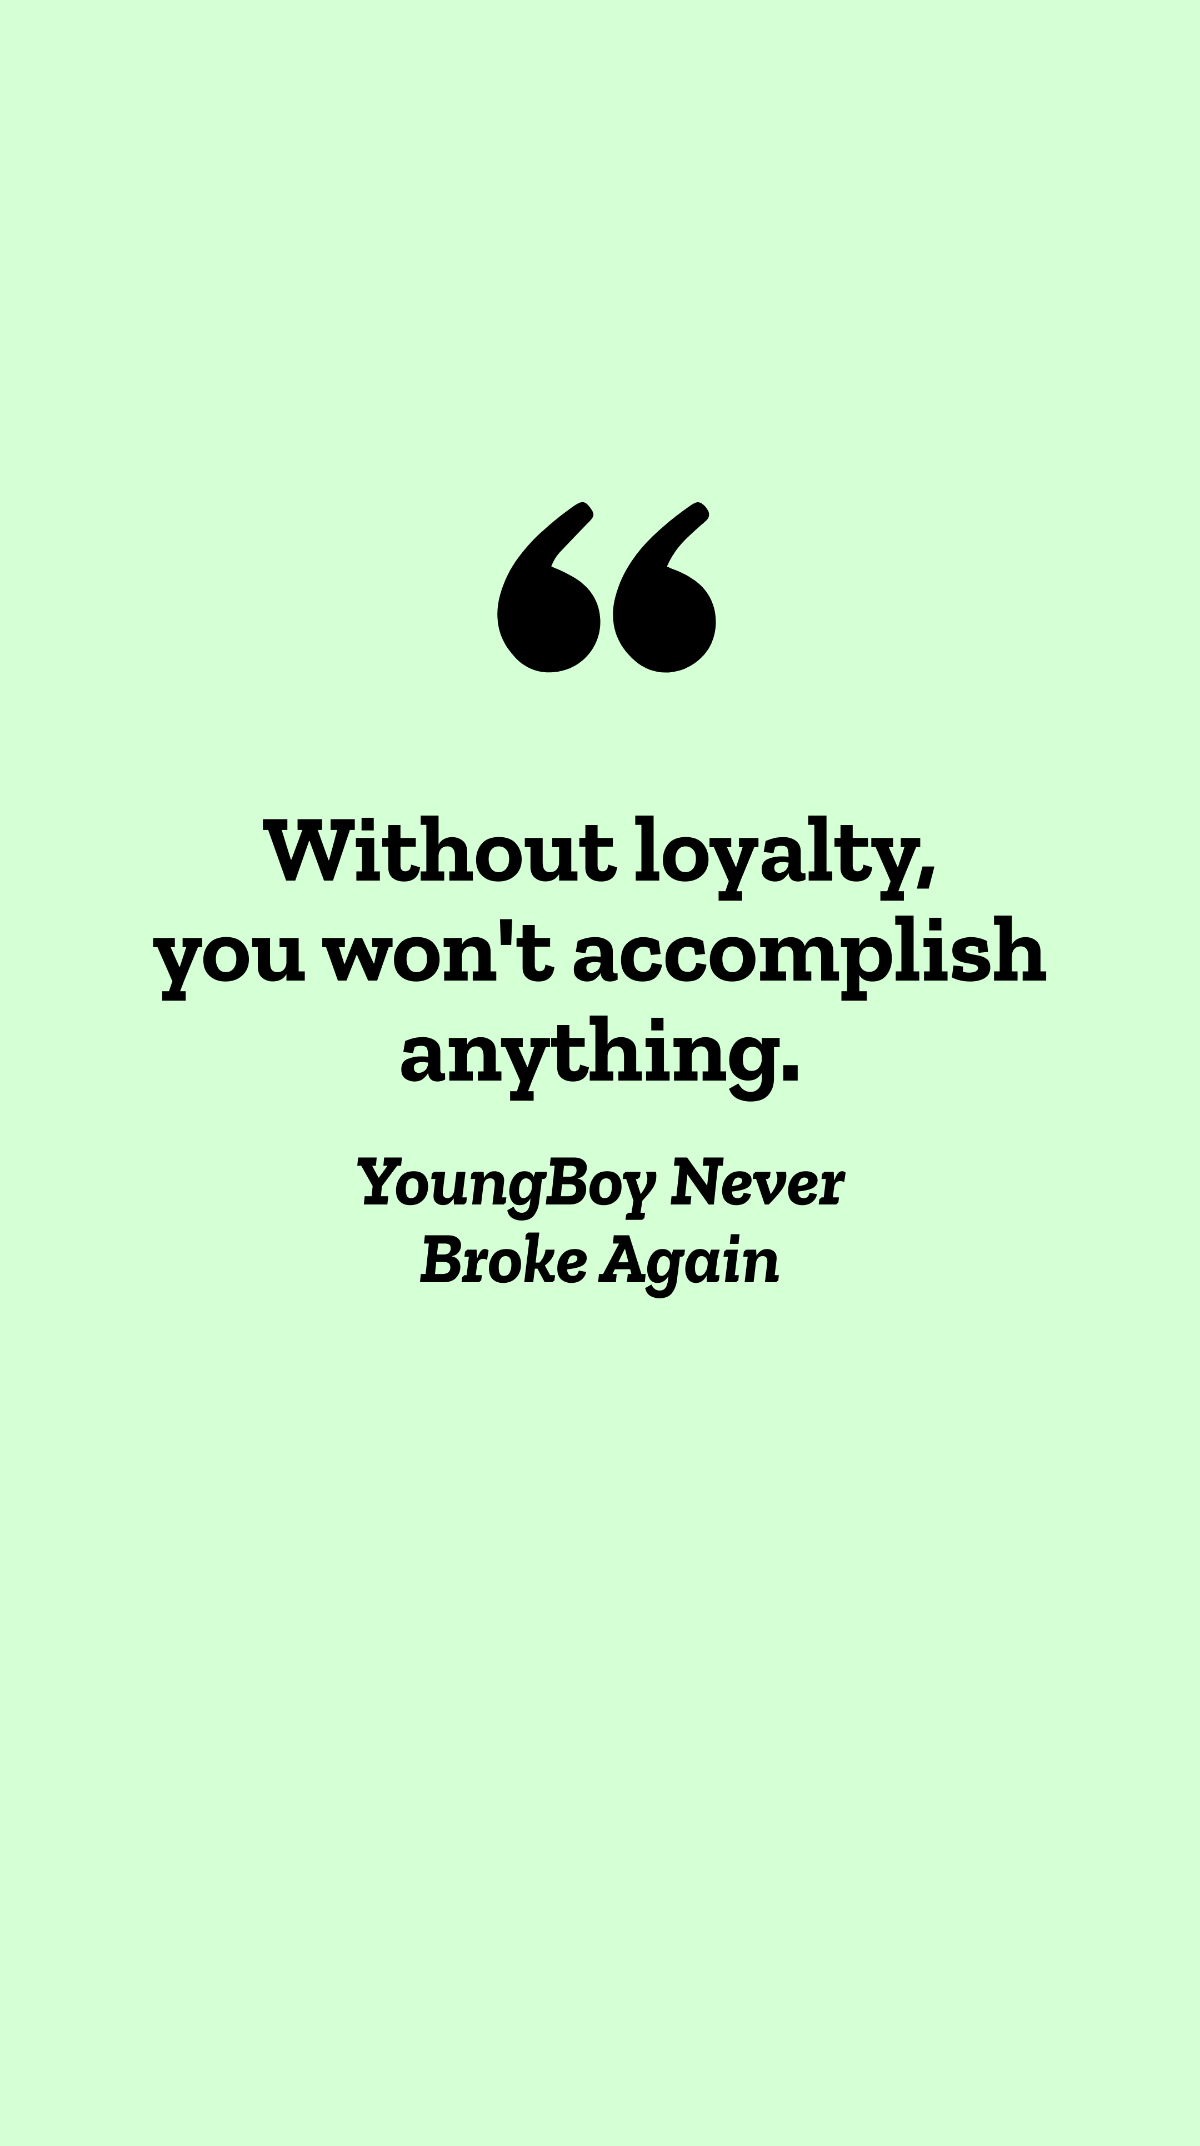 YoungBoy Never Broke Again - Without loyalty, you won't accomplish anything. Template